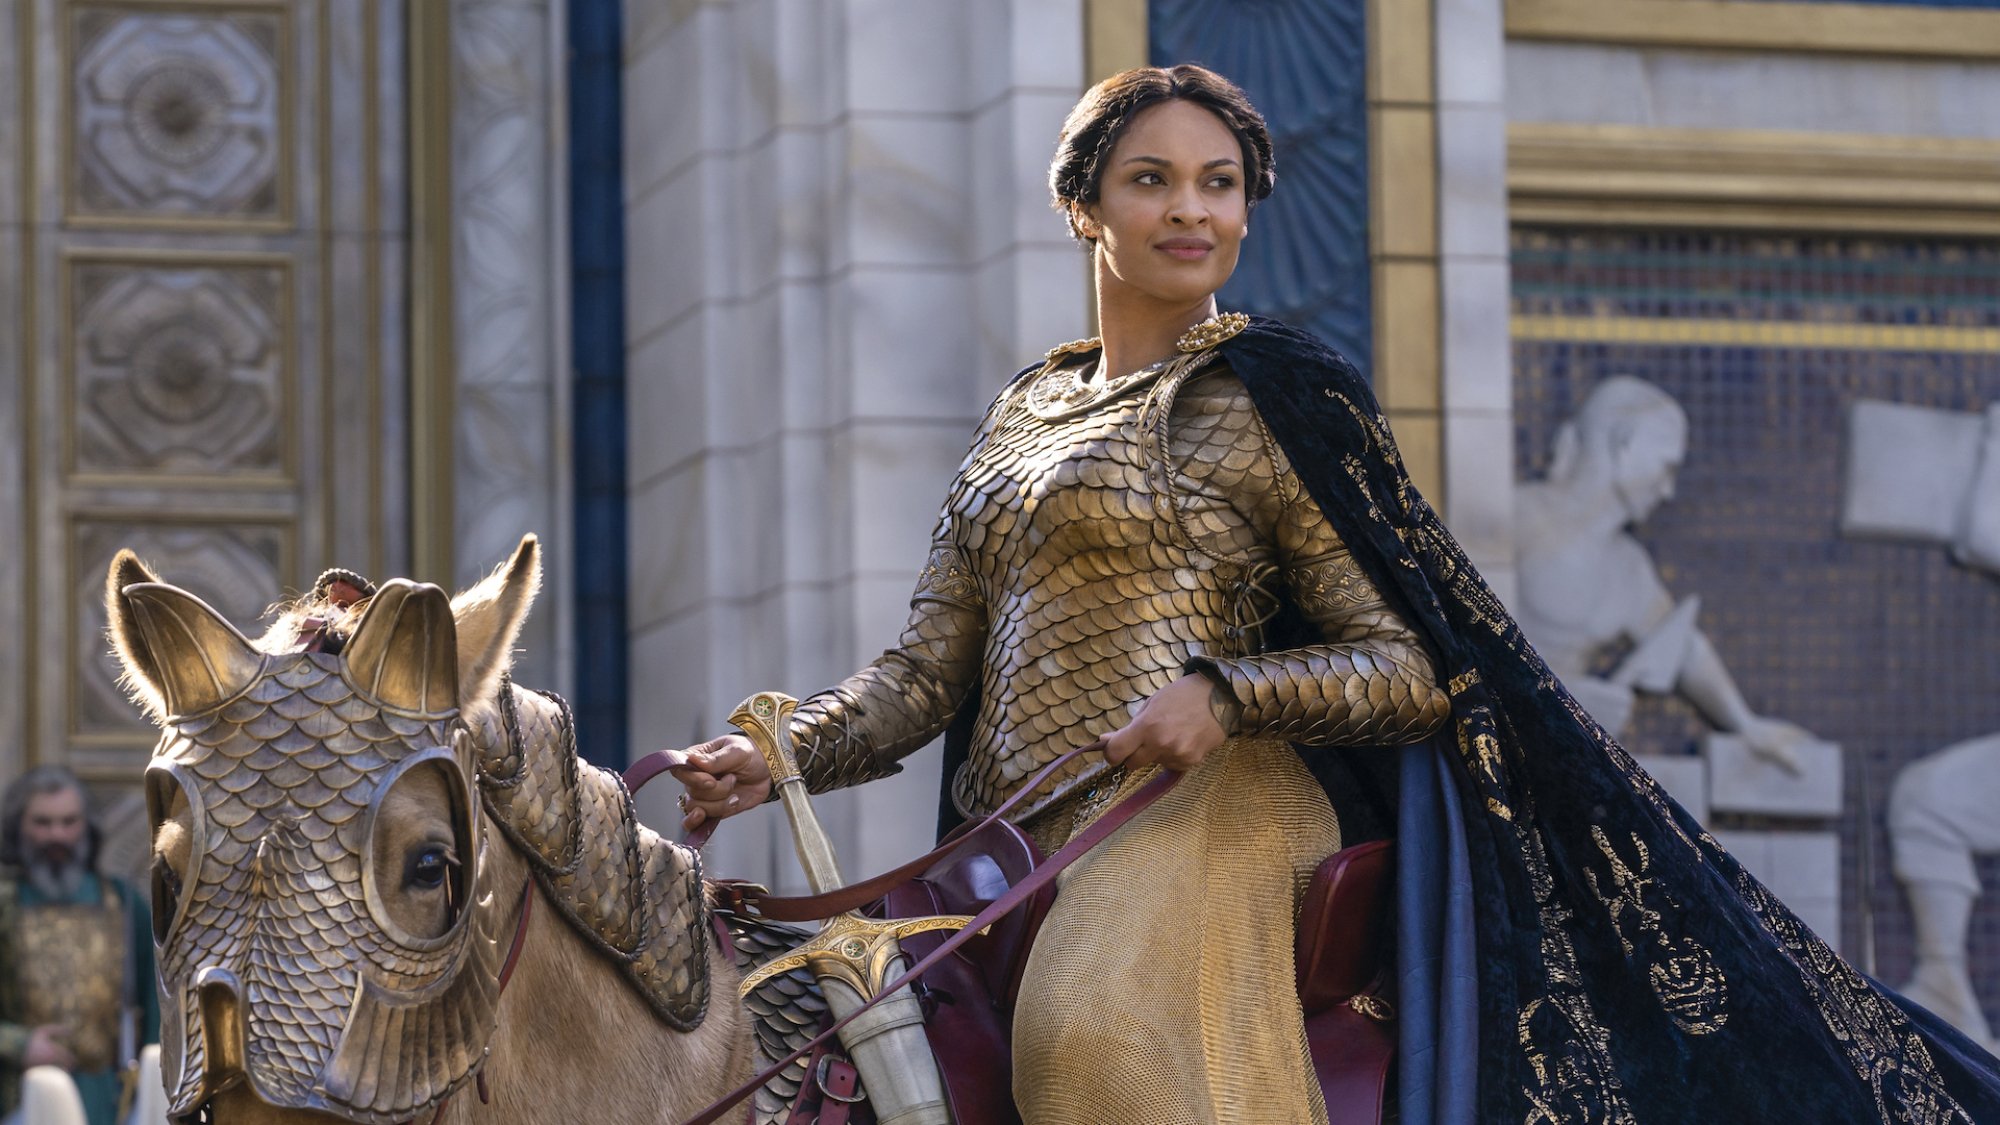 A woman in golden armor rides a horse in golden accoutrements.